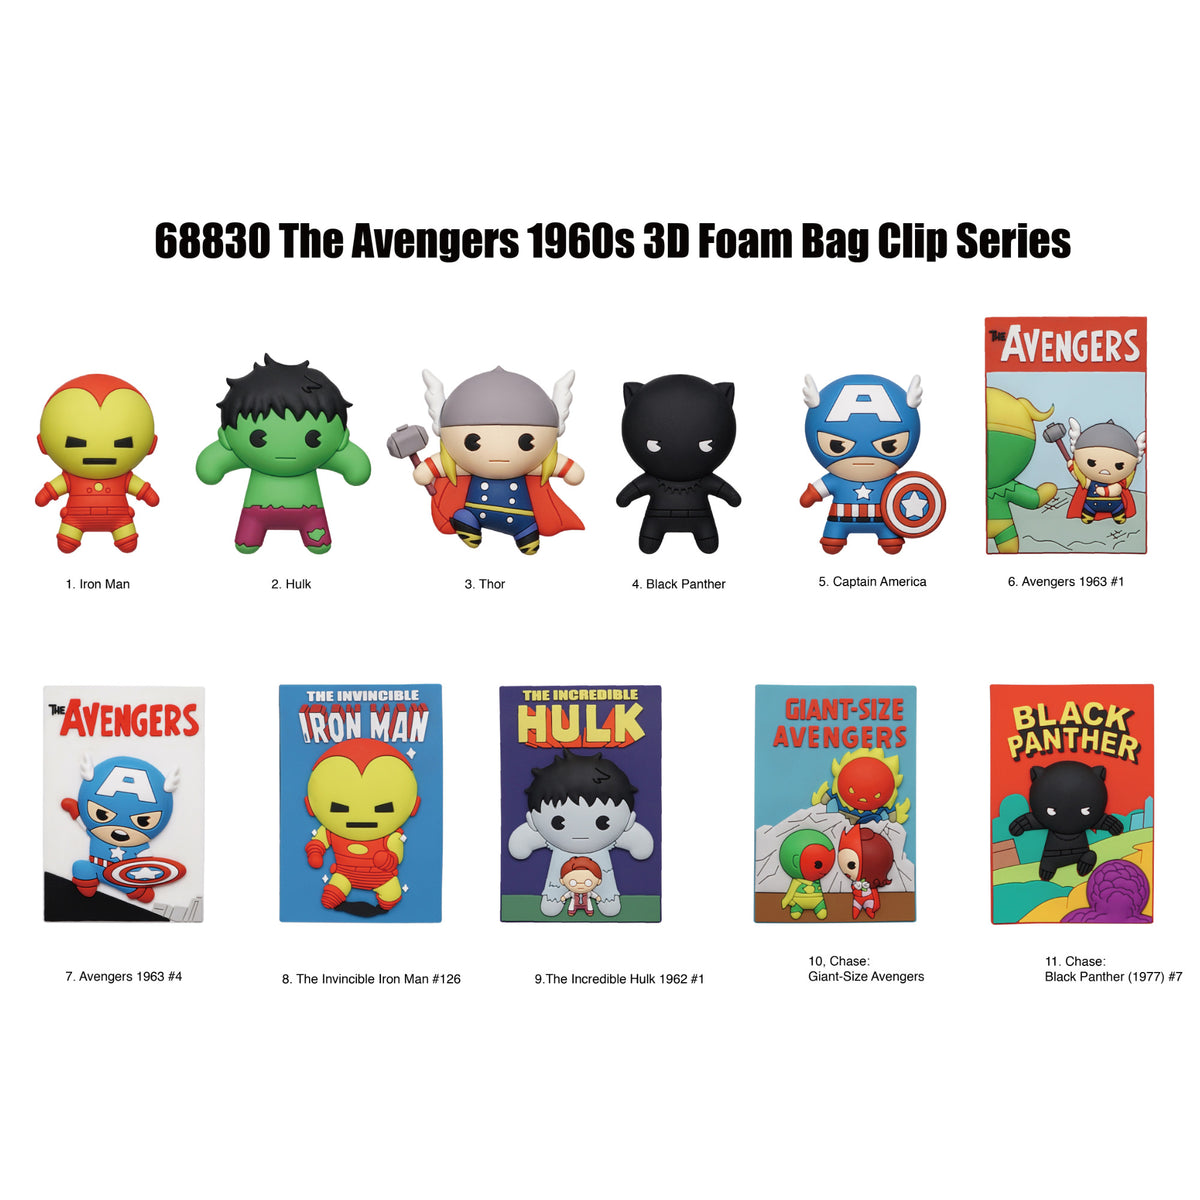 Avengers 60th Anniversary Mystery Bag Clip - Series 11